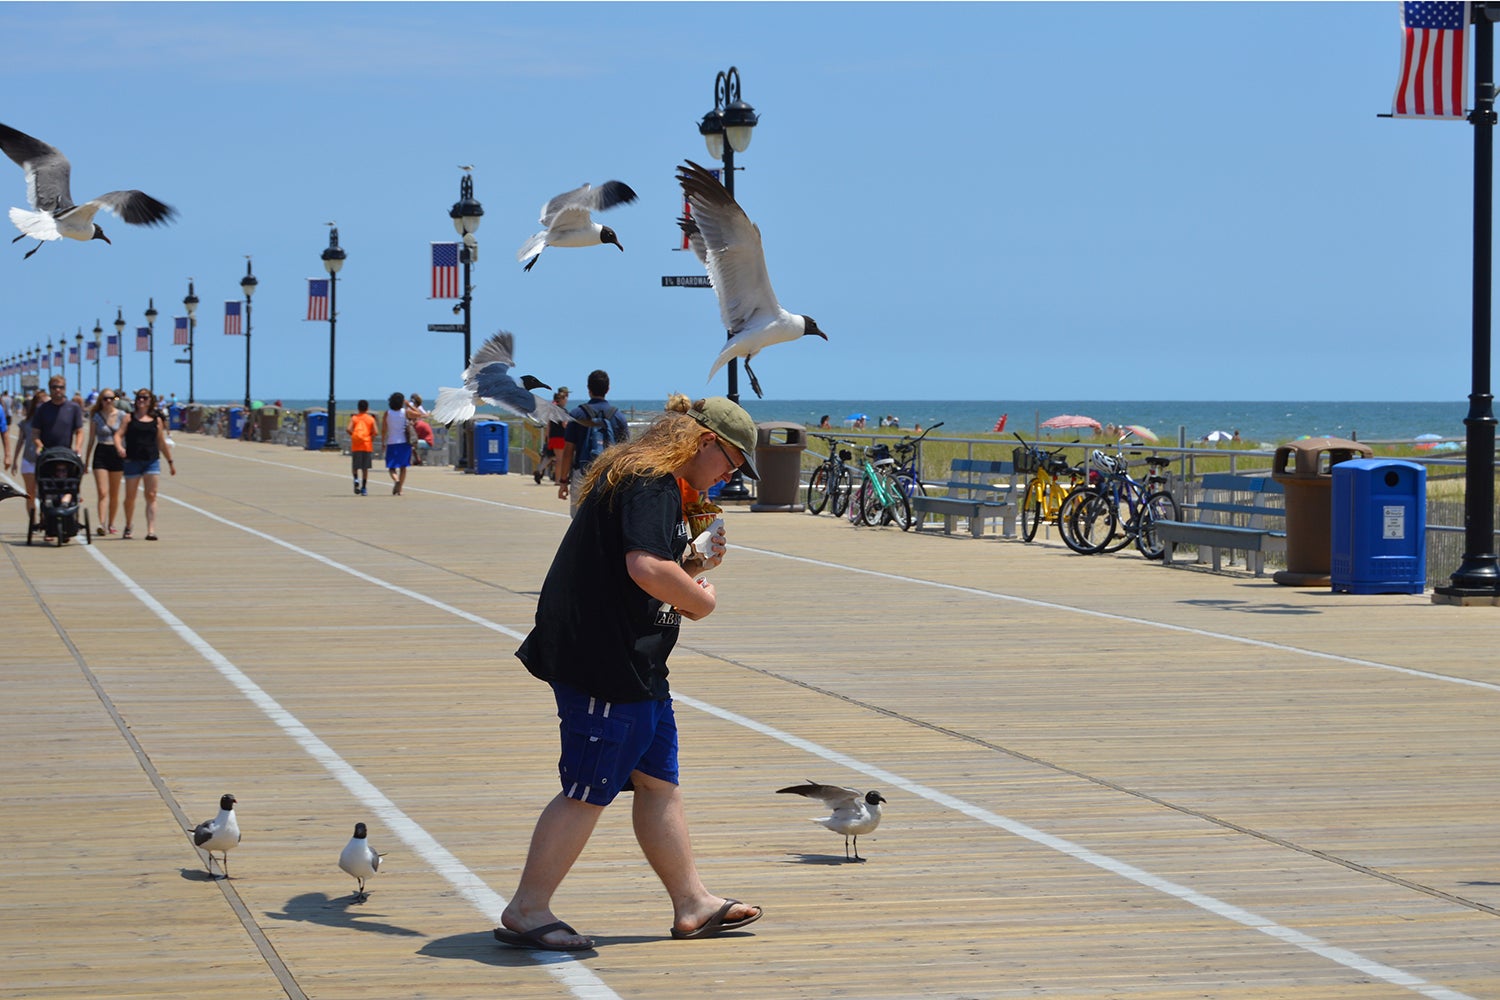 Breaking News person crosses boardwalk whereas being adopted and pressured by seagulls